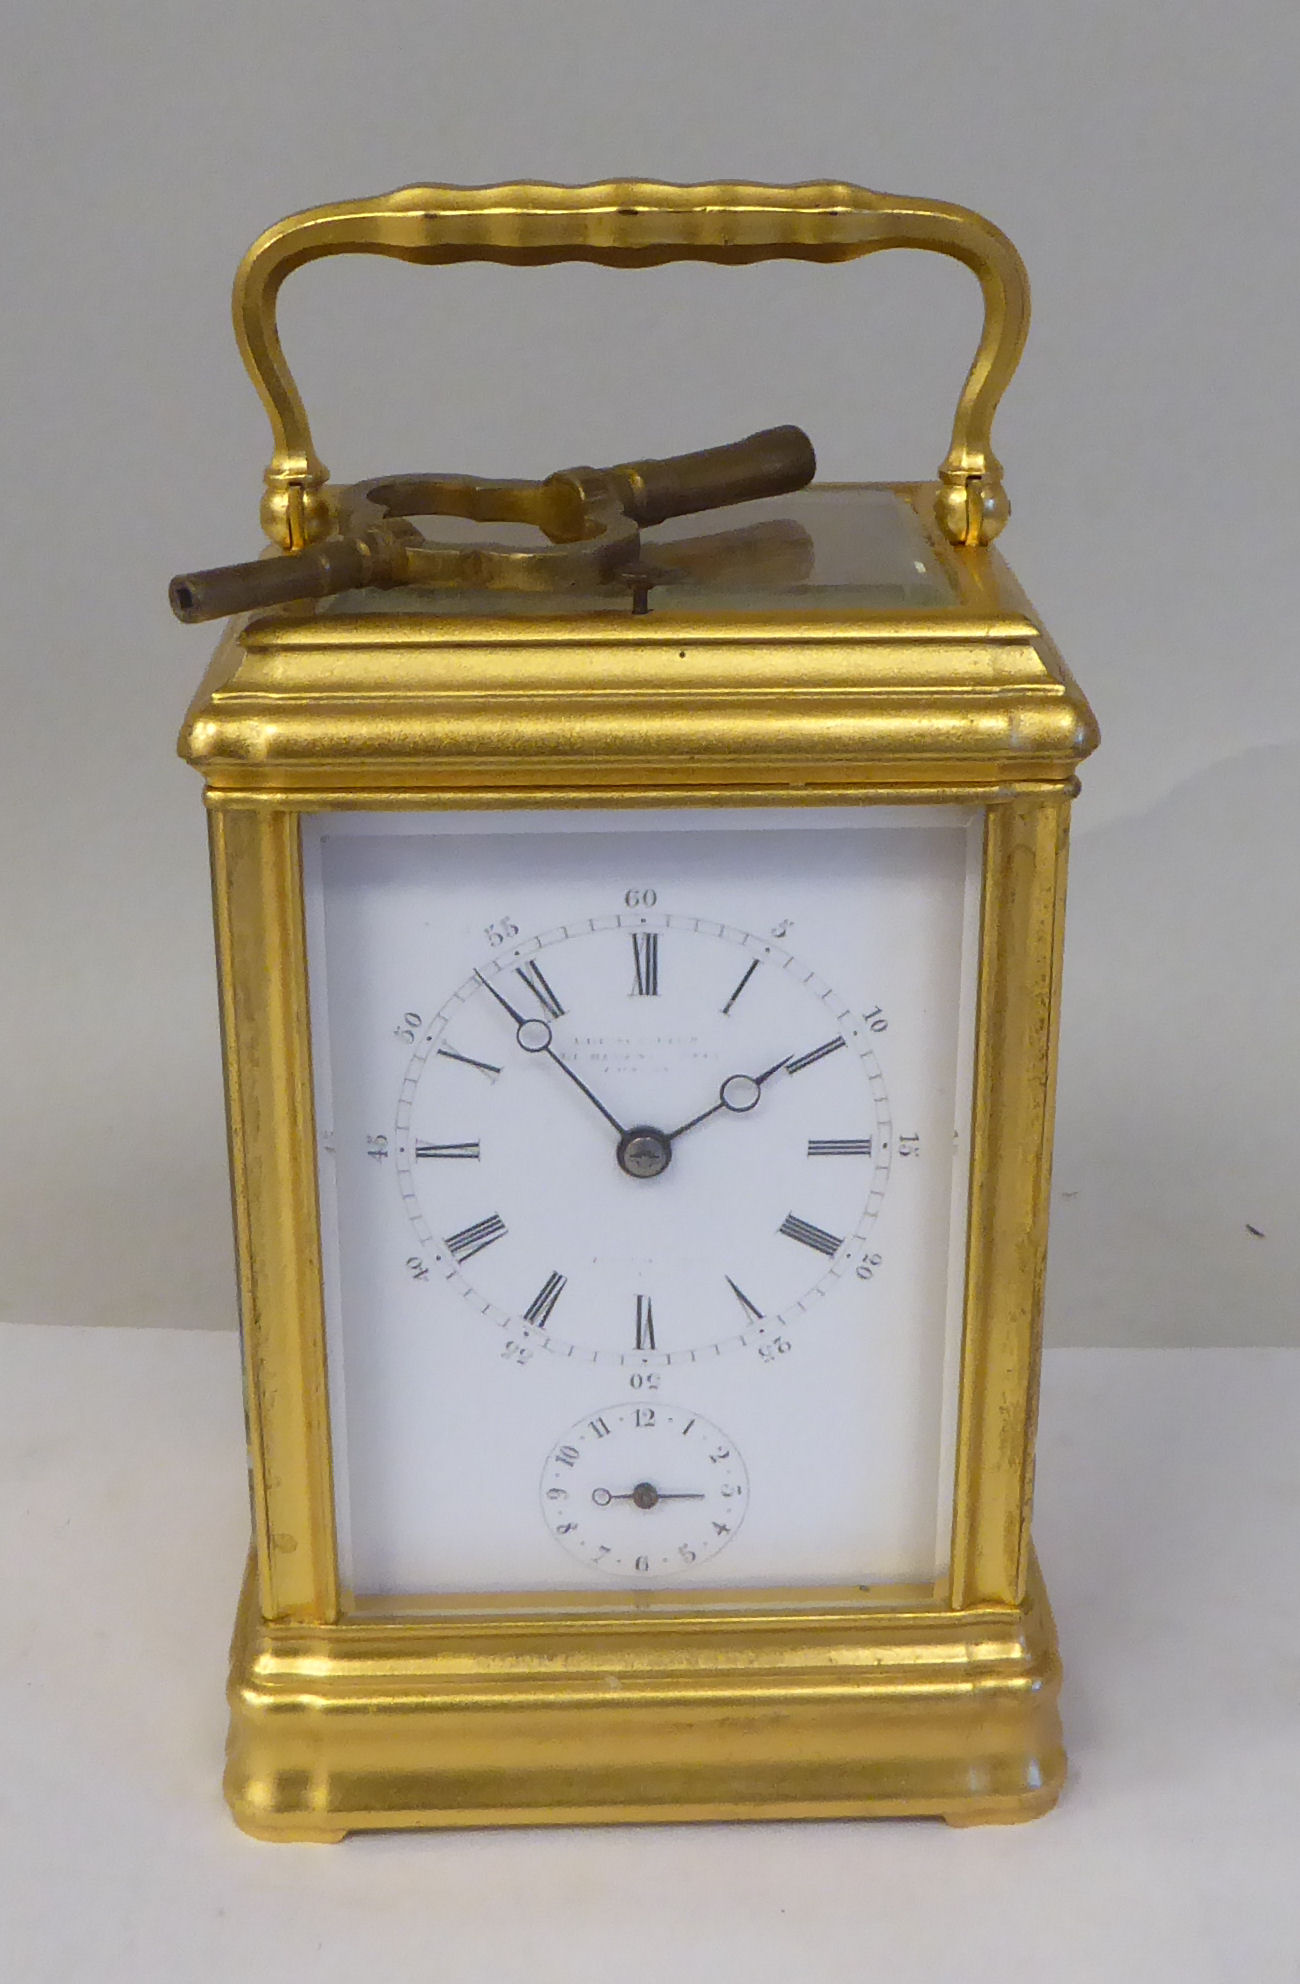 An early 20thC French lacquered brass cased carriage clock with a folding top handle and bevelled